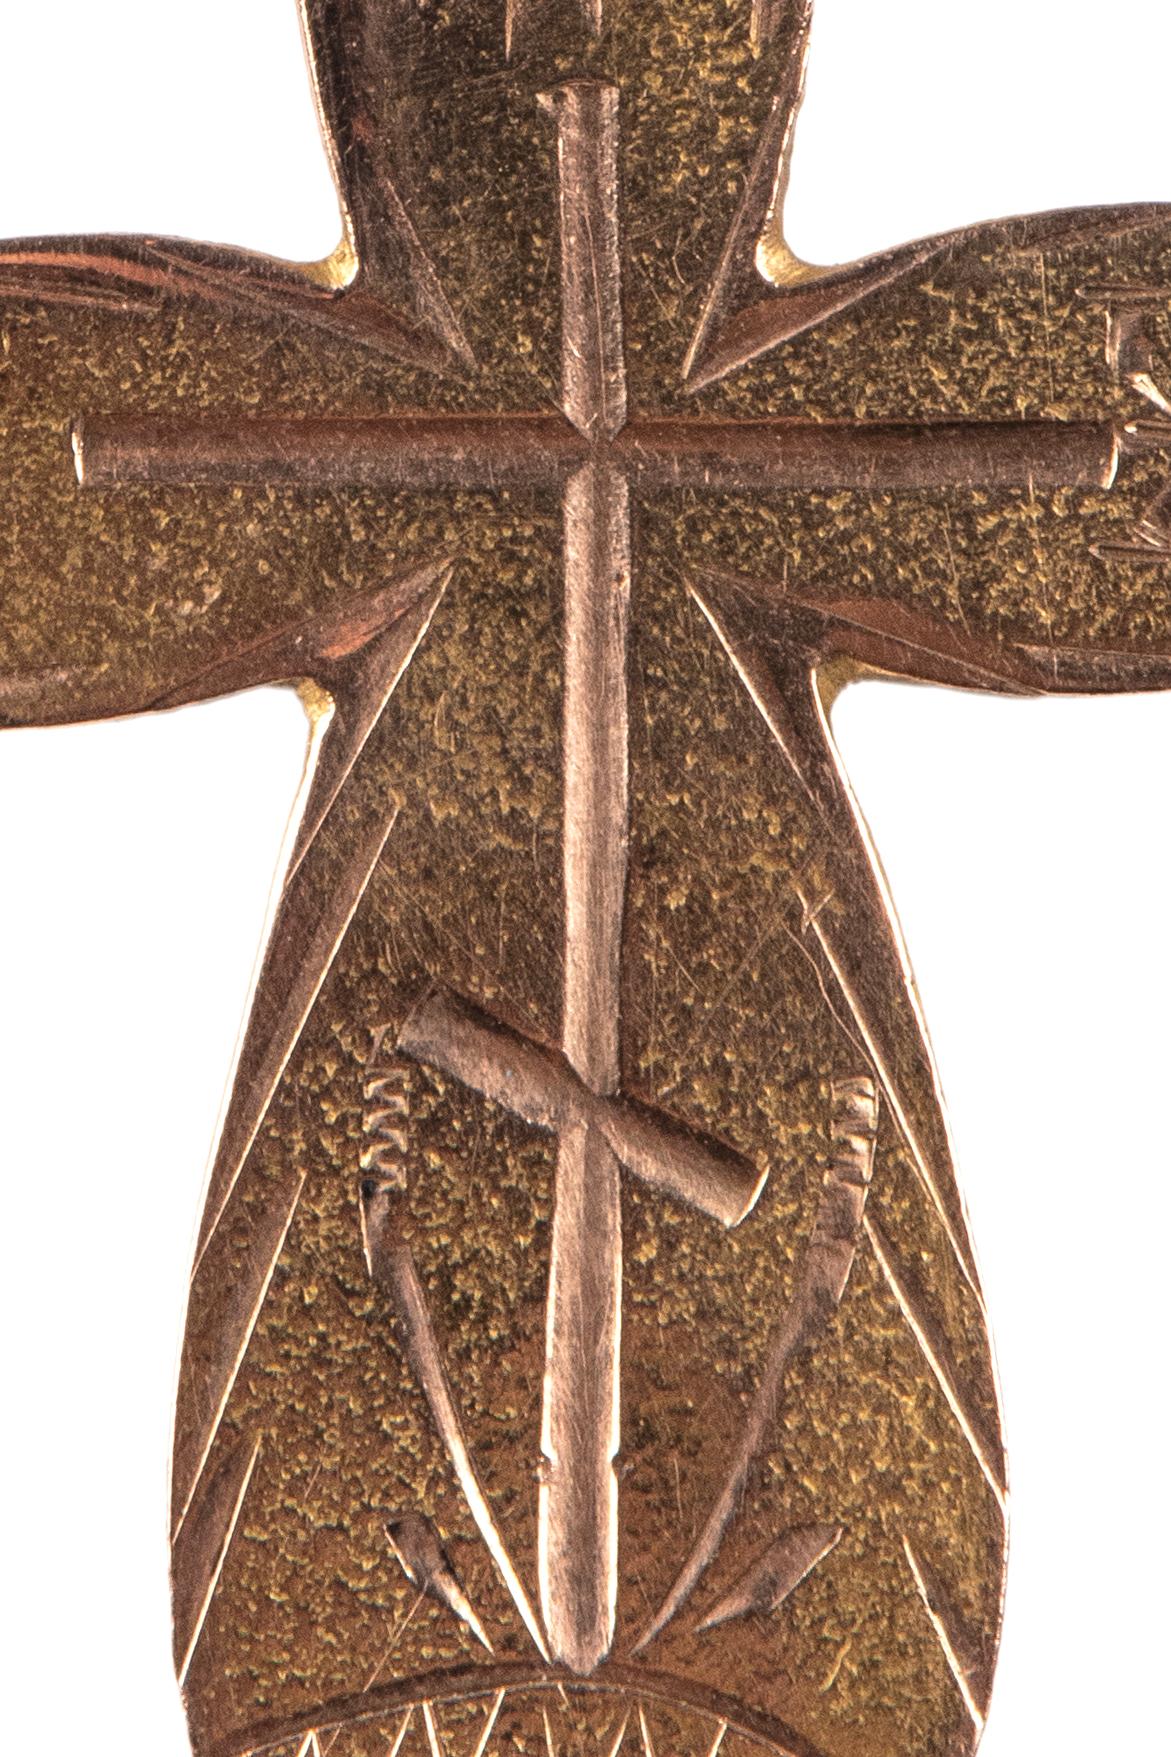 Moscow, 1878

From the Romanov era, period of the Tsar Liberator Alexander II, a gold pendant cross from the ancient capital of Moscow, the front engraved with a central cross.

Moscow, 1878, chain not included.

1 ¼ x 7/8 in  (3.2 x 2.2 cm)